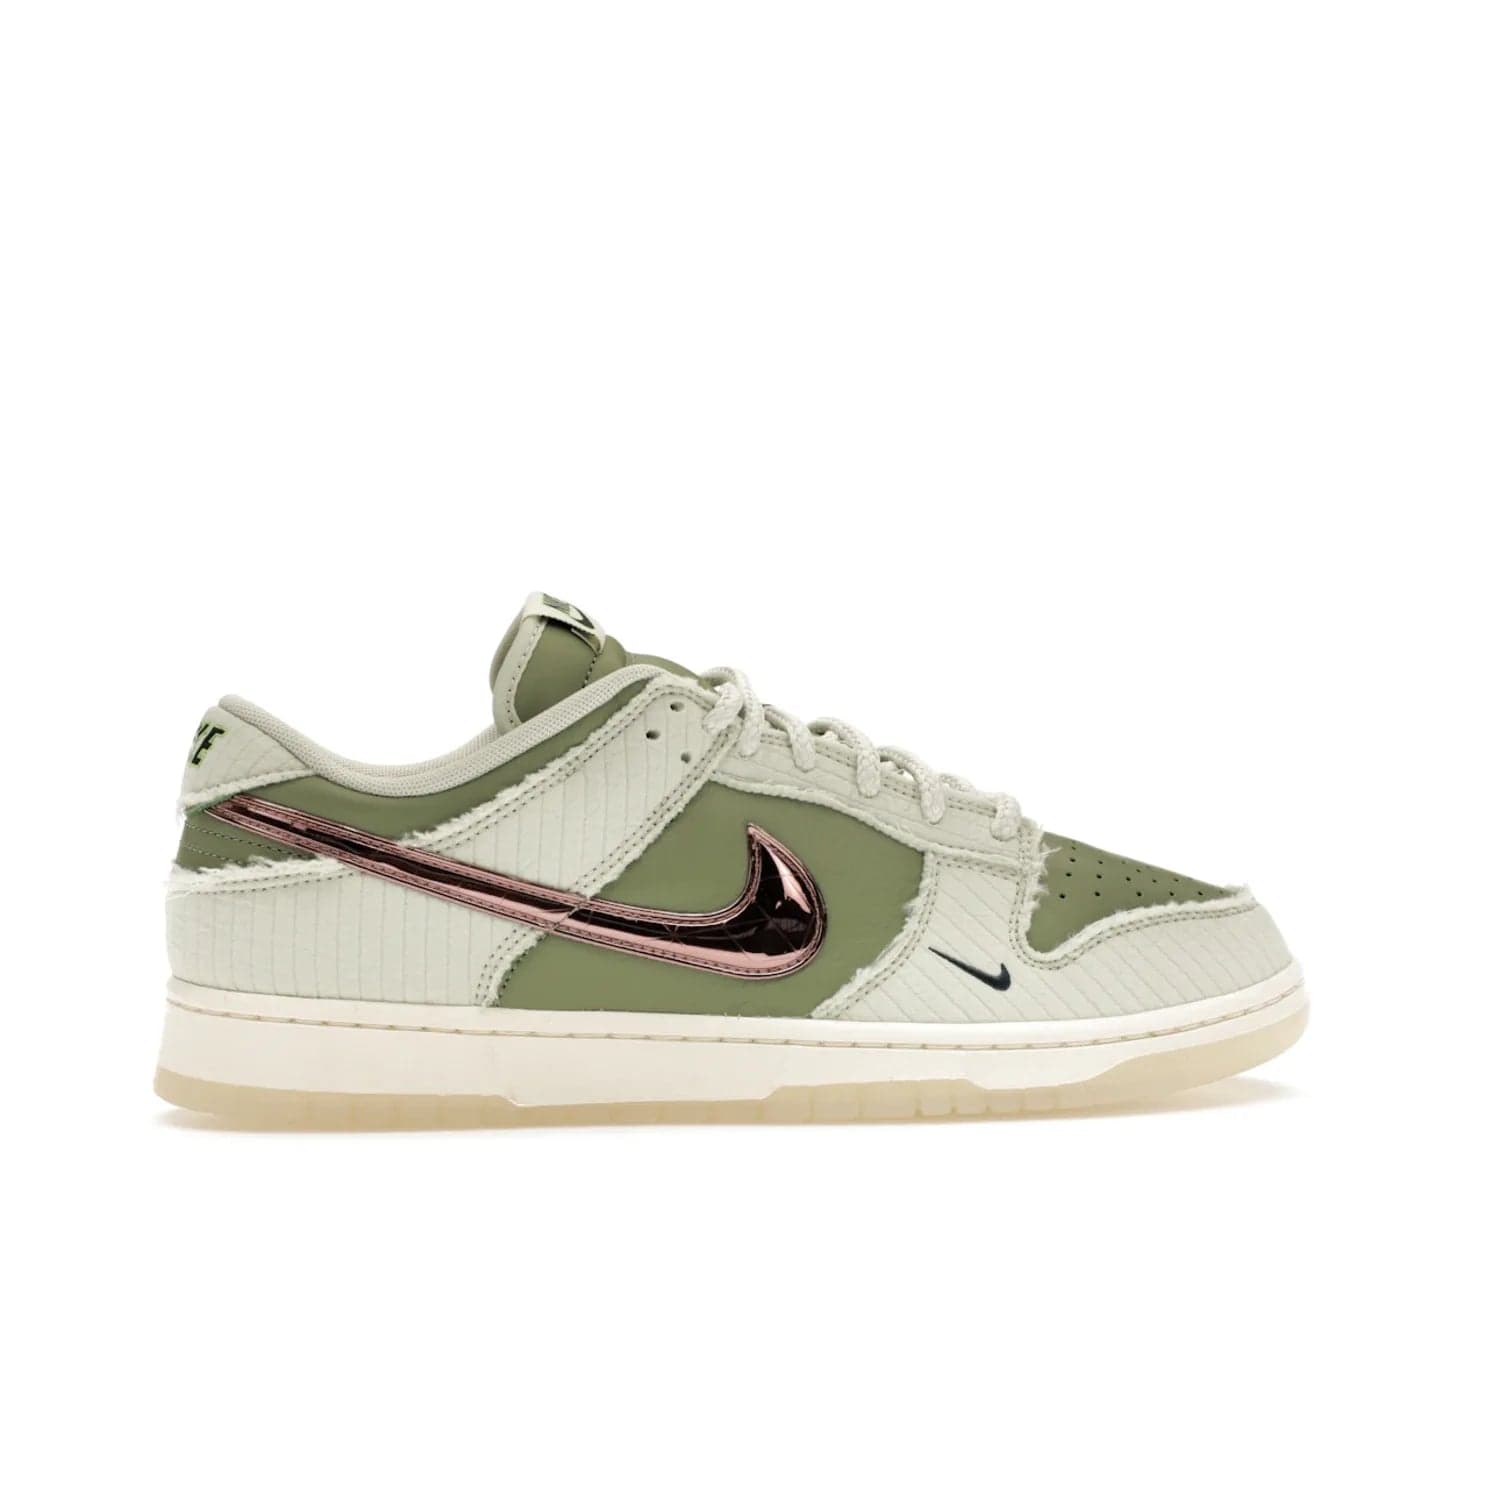 Nike Dunk Low Retro PRM Kyler Murray Be 1 of One - Image 36 - Only at www.BallersClubKickz.com - Introducing the Nike Dunk Low Retro PRM Kyler Murray "Be 1 of One"! A Sea Glass upper with Sail and Oil Green accents, finished with Rose Gold accents. Drop date: November 10th.